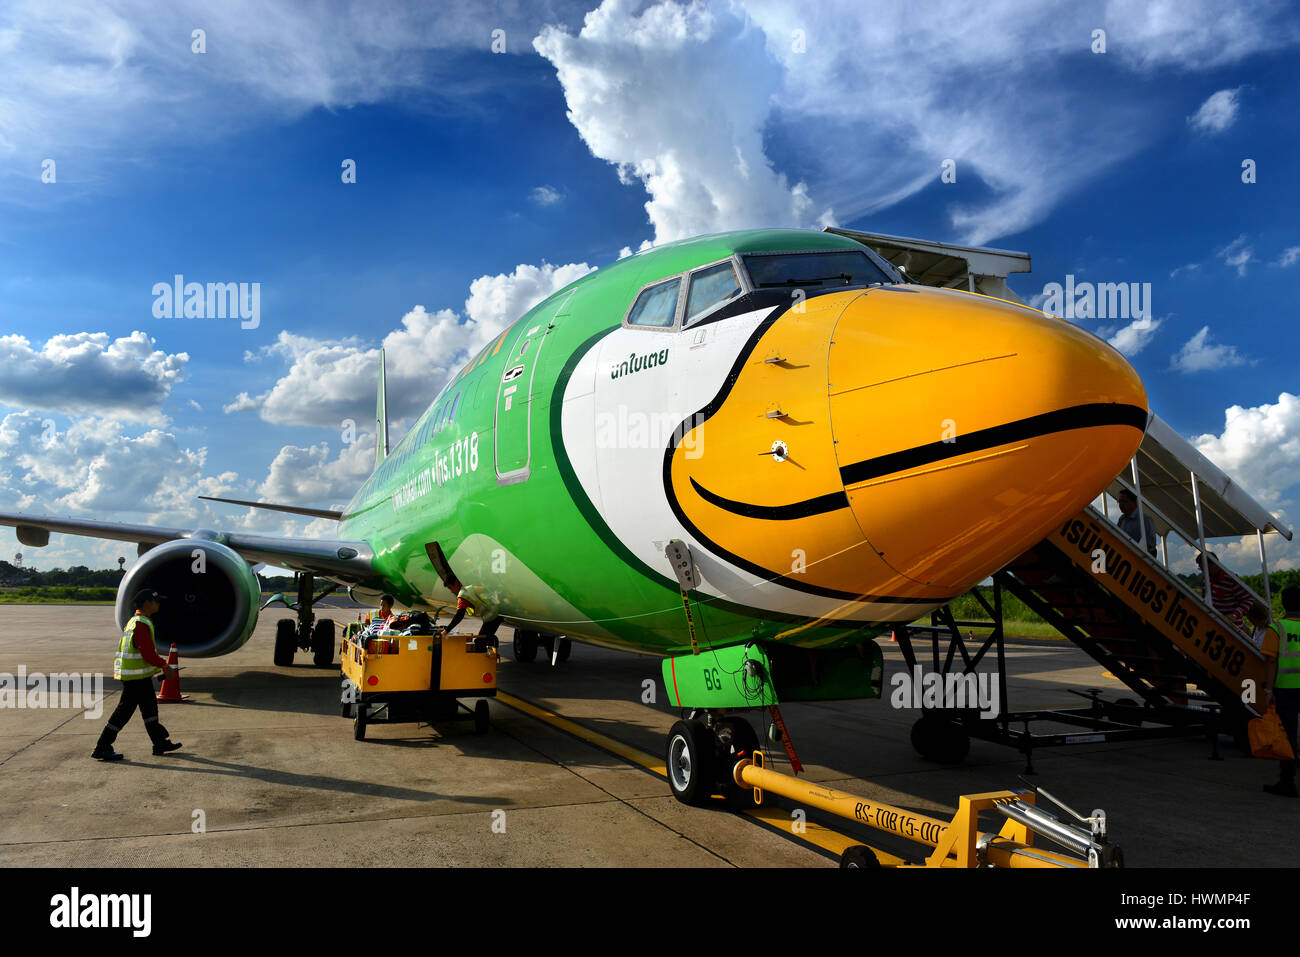 Udon Thani,Thailand August 22, 2015:Boeing 737-8FH from Nok air airline ,parking at the Udon Thani airport and unidentified men are working with the p Stock Photo